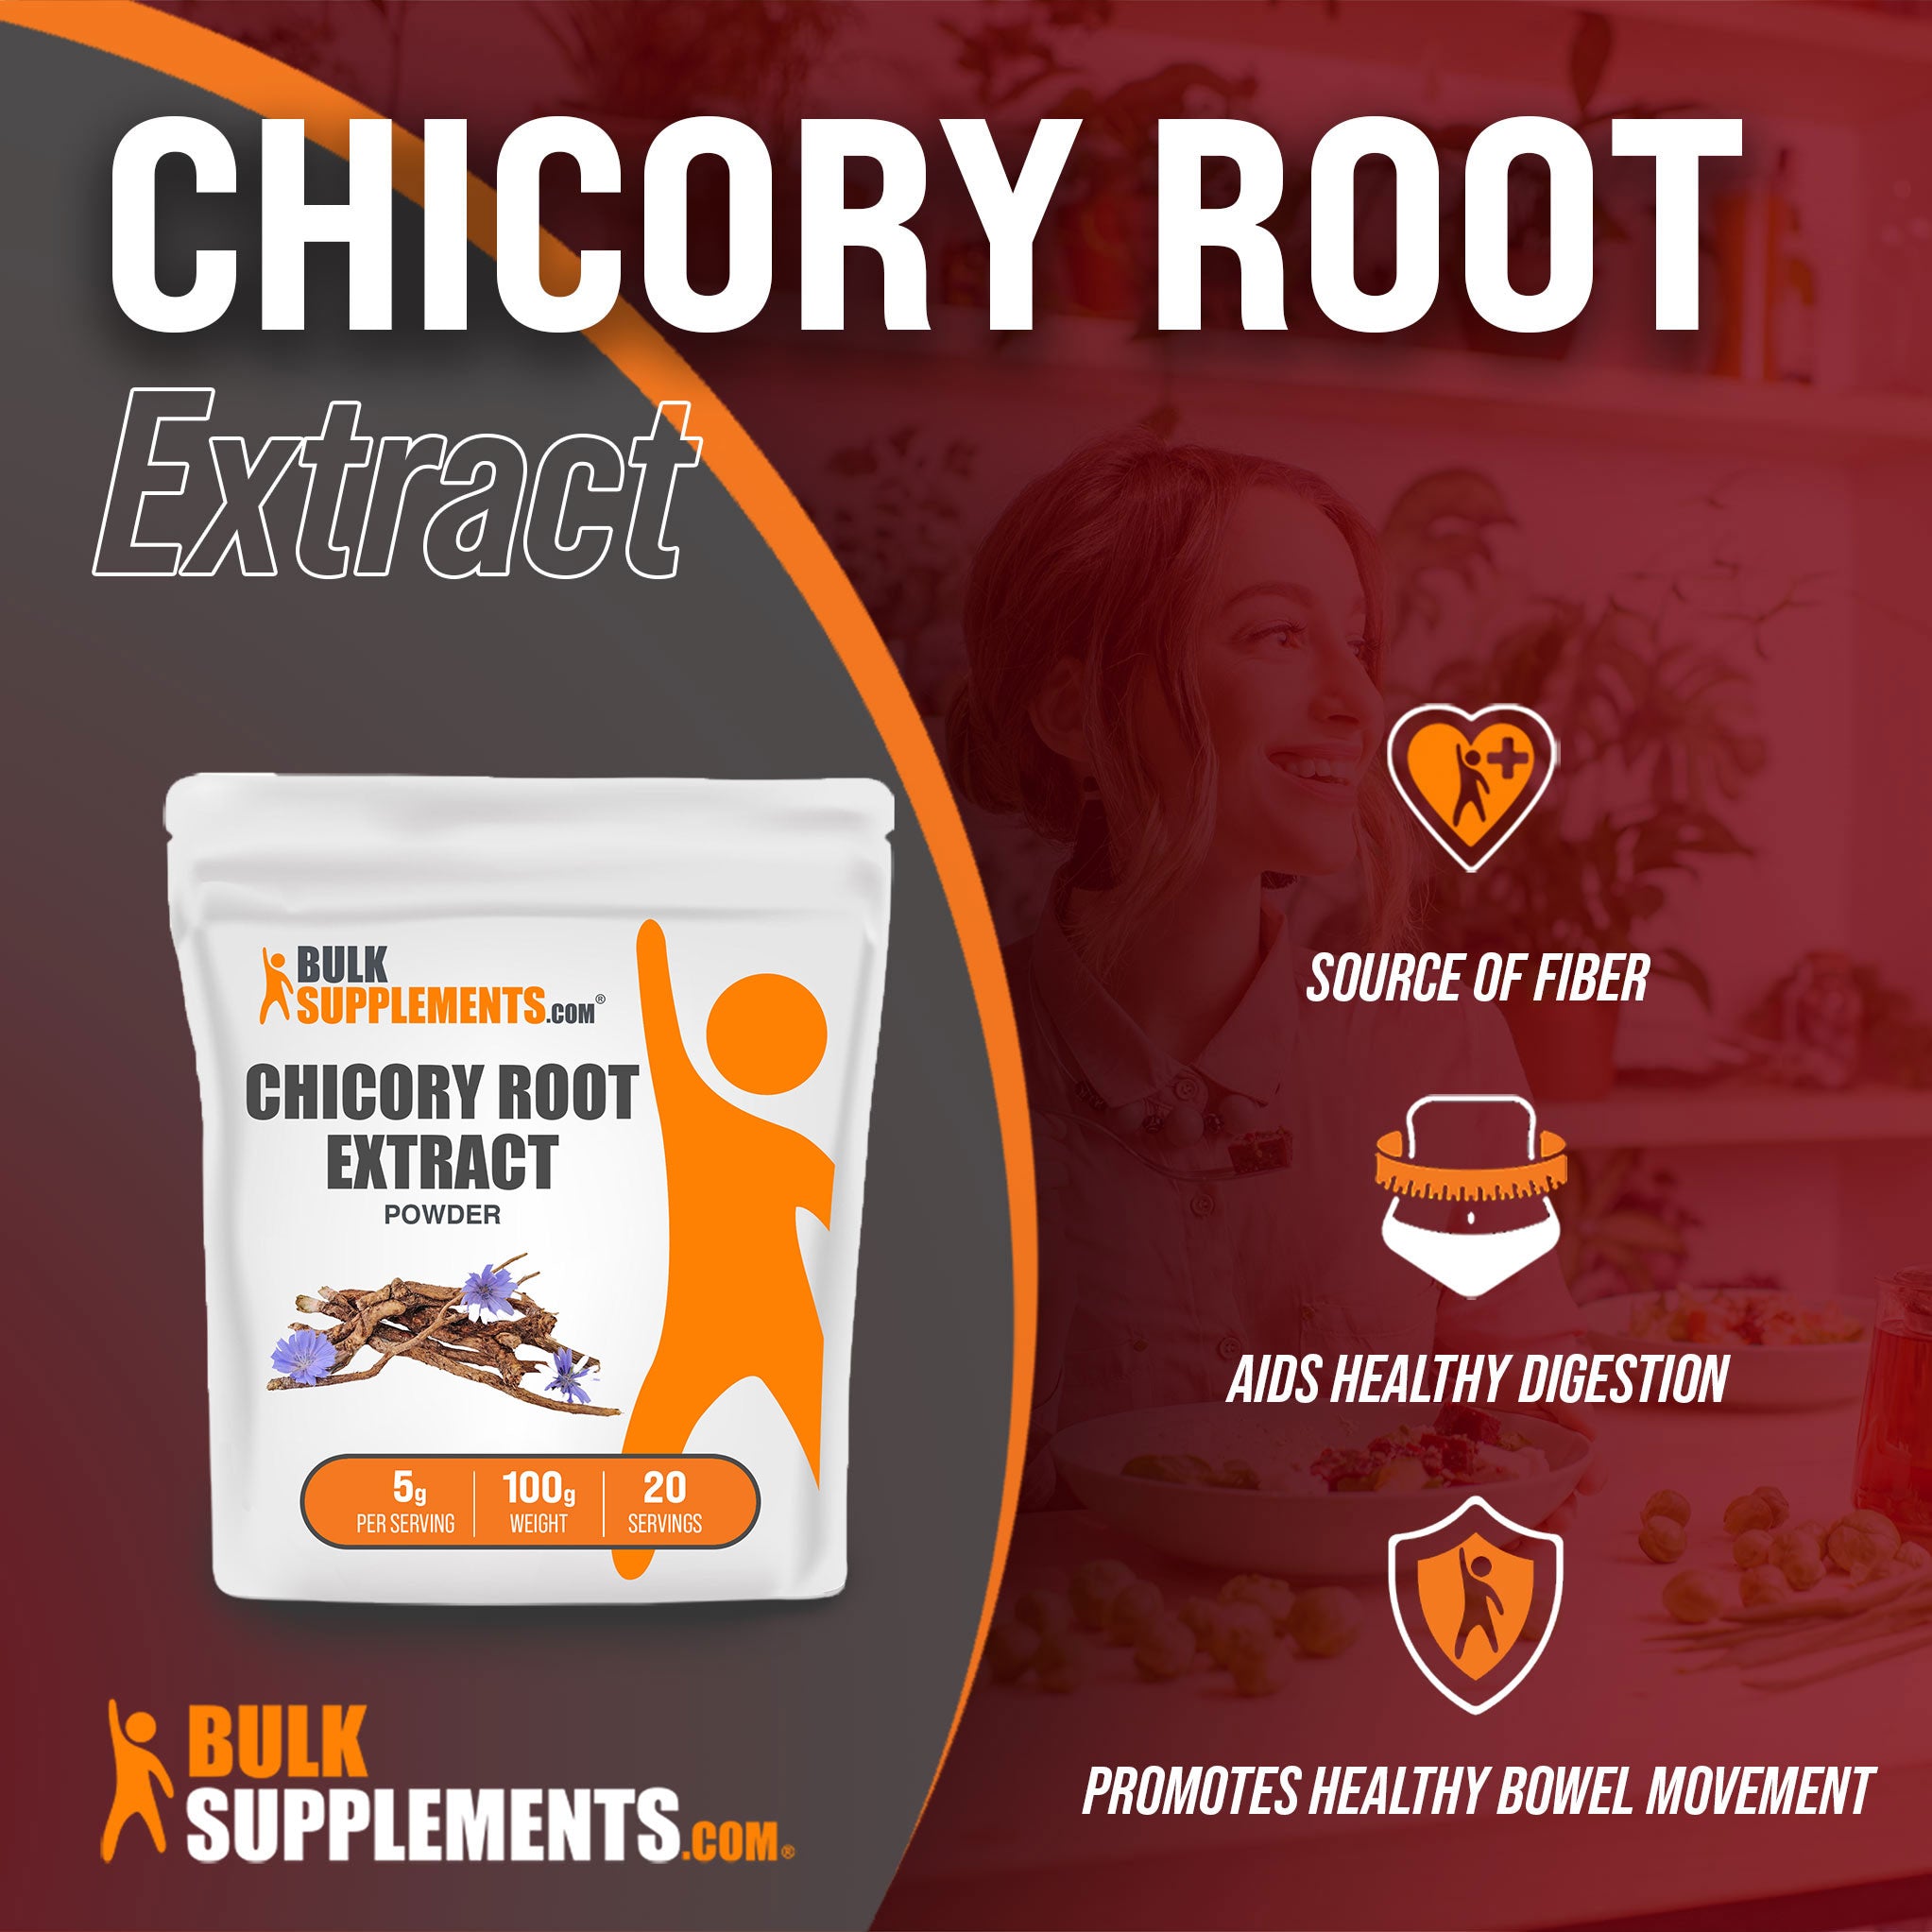 Benefits of 100g Chicory Root Extract Powder; fiber supplement, aids healthy digestion, promotes healthy bowel movement